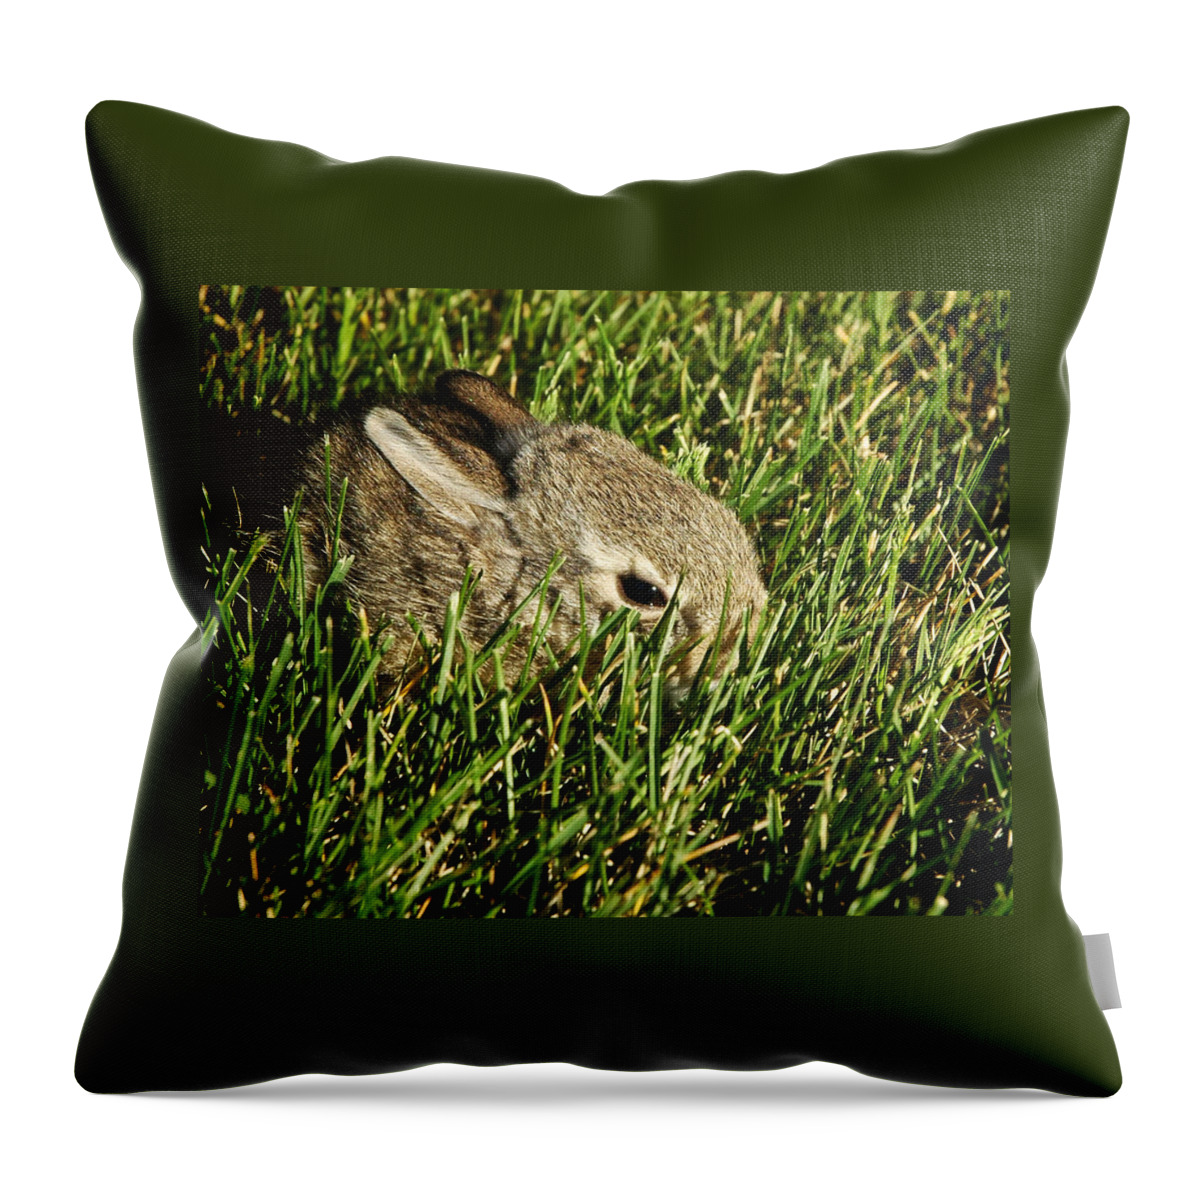 Animals Throw Pillow featuring the photograph The Baby Cottontail by Mary Lee Dereske